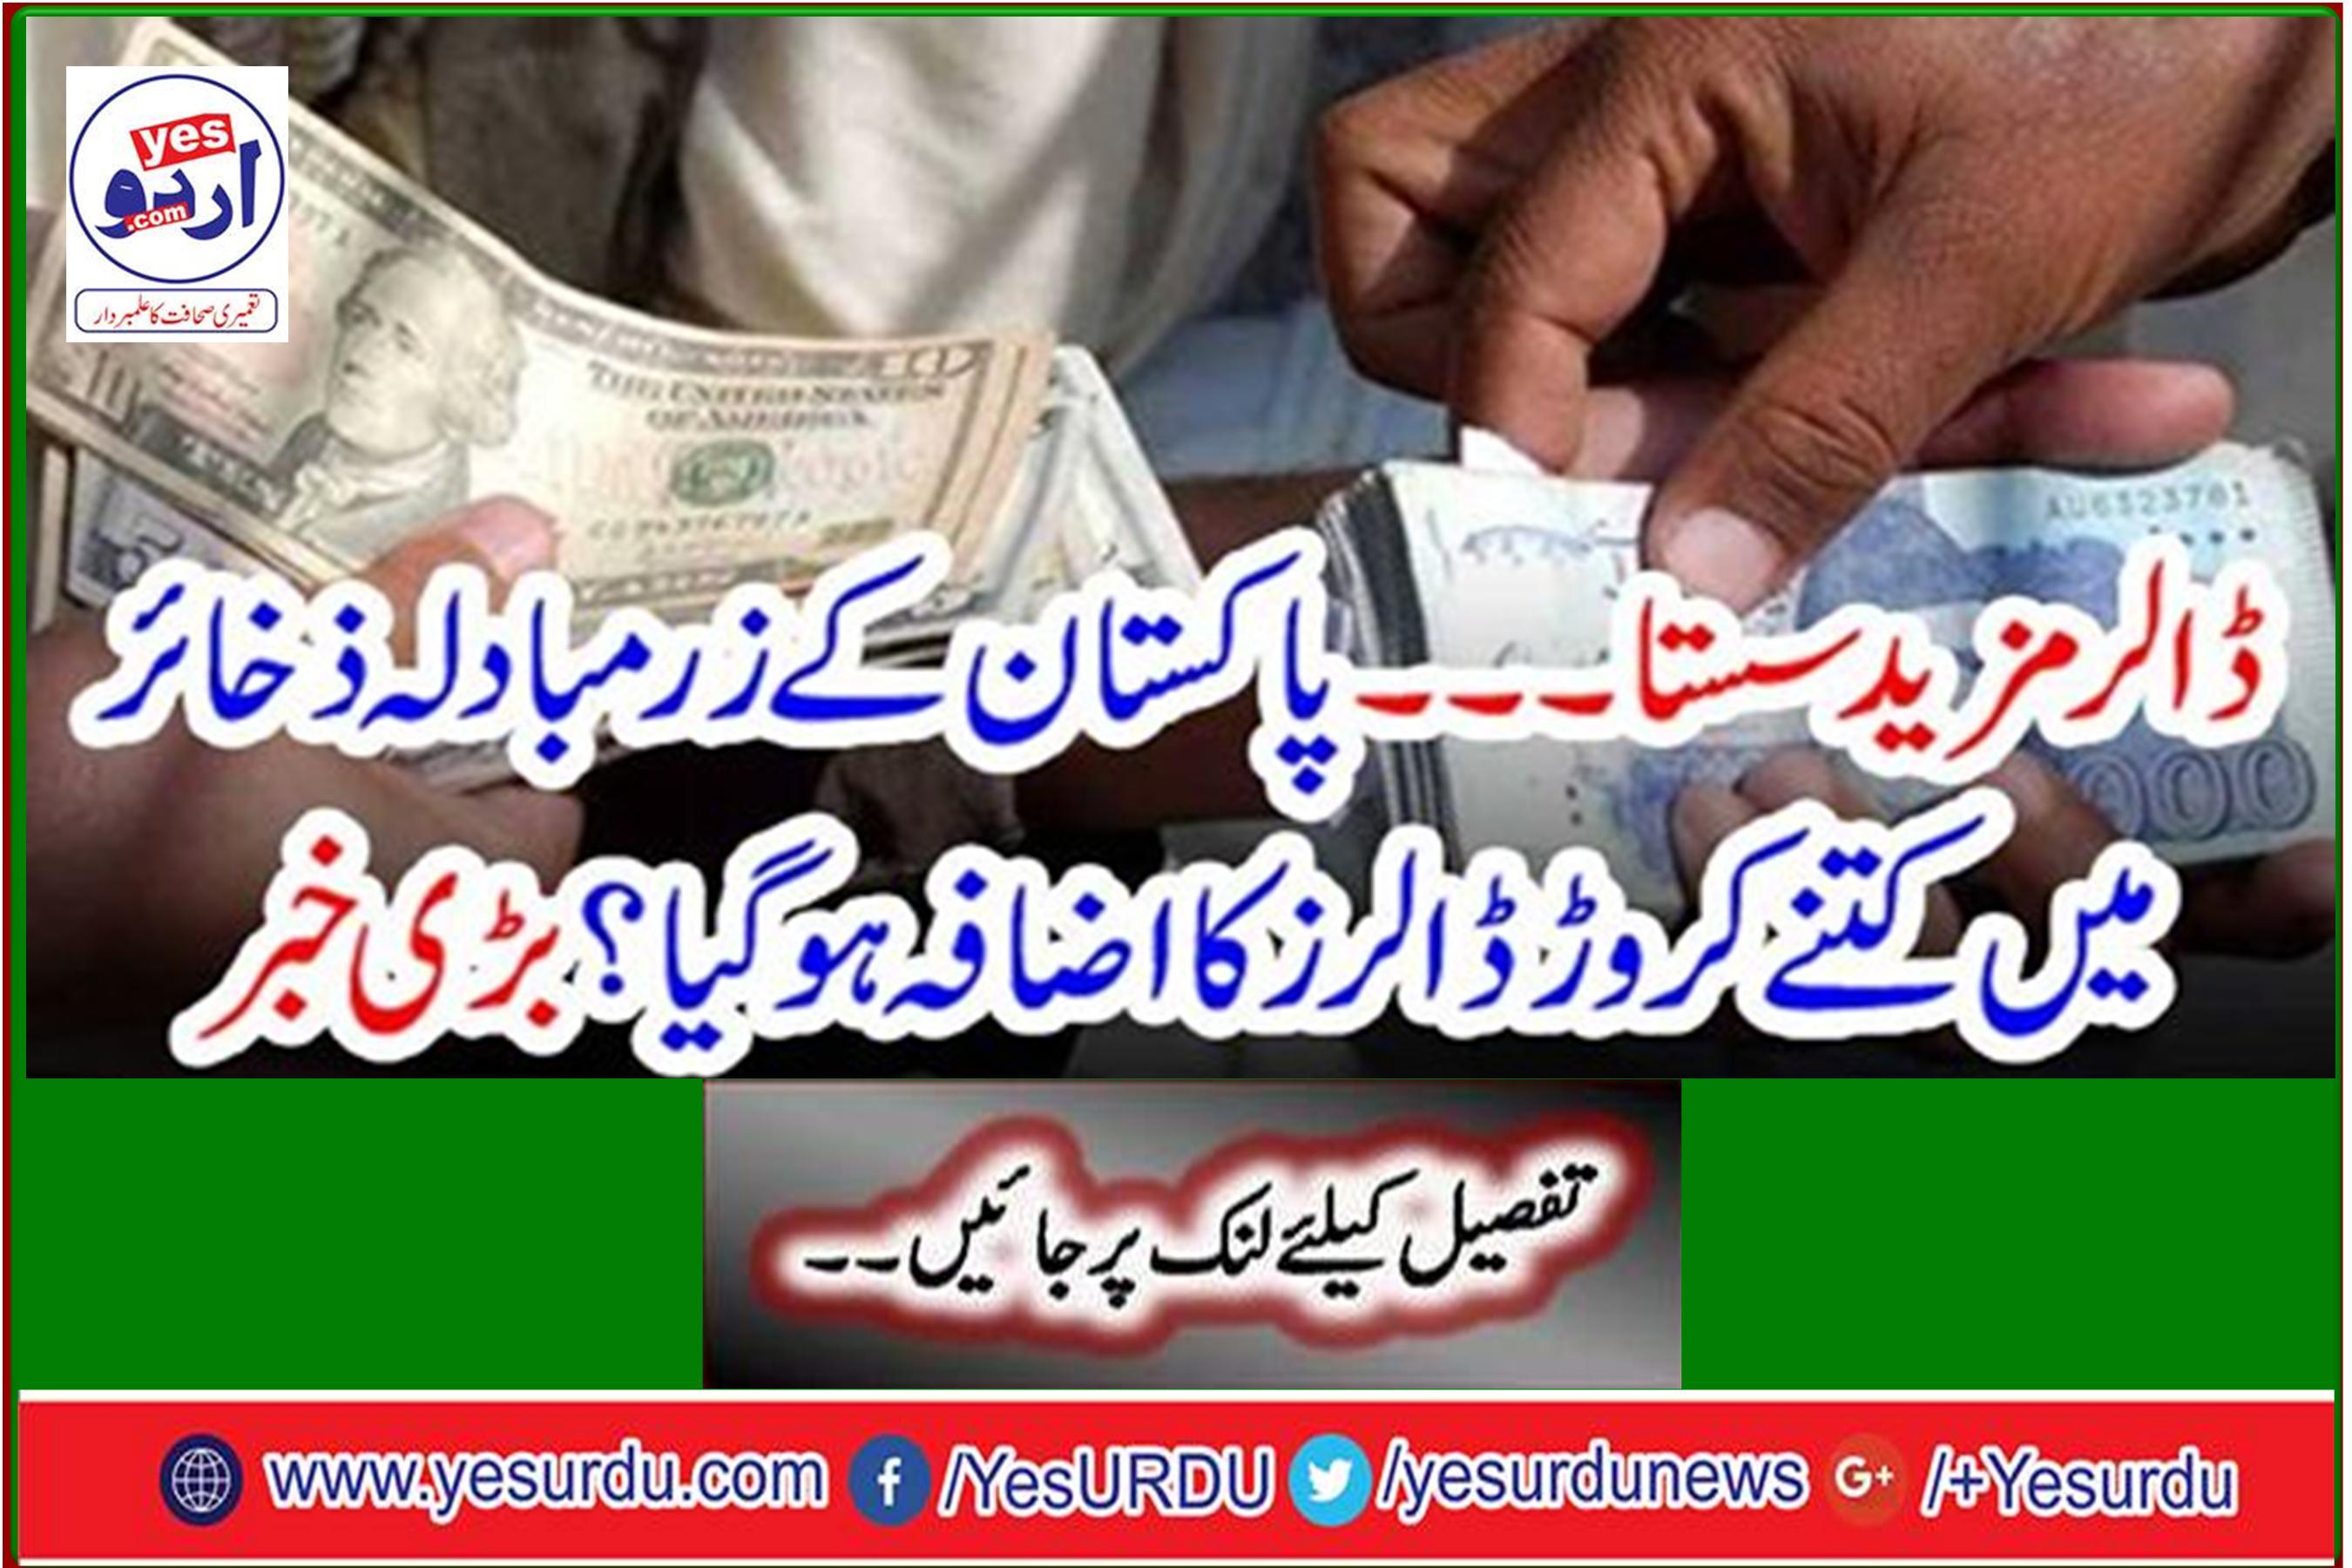 Dollar cheaper ... Pakistan's foreign exchange reserves increased by how many dollars? Great news